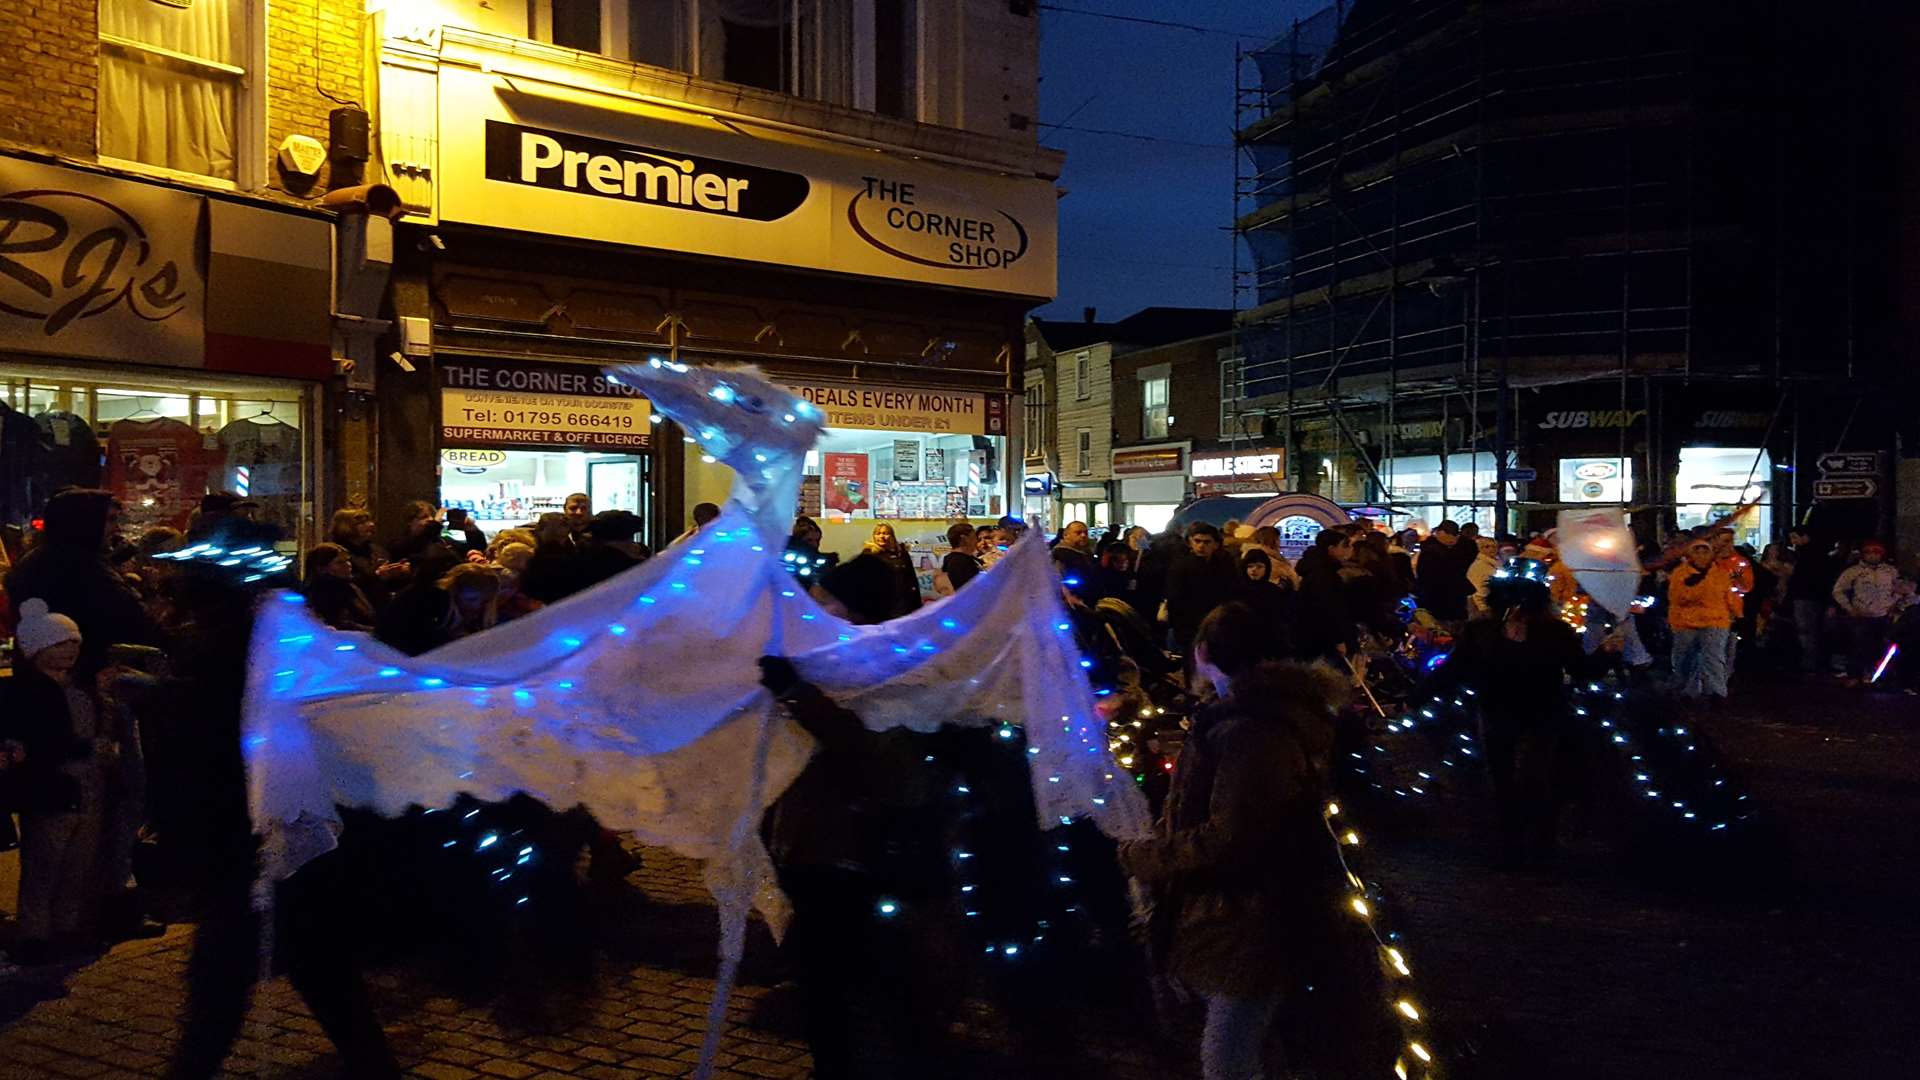 The lantern parade winds itself around the clocktower heading down the Broadway from High Street